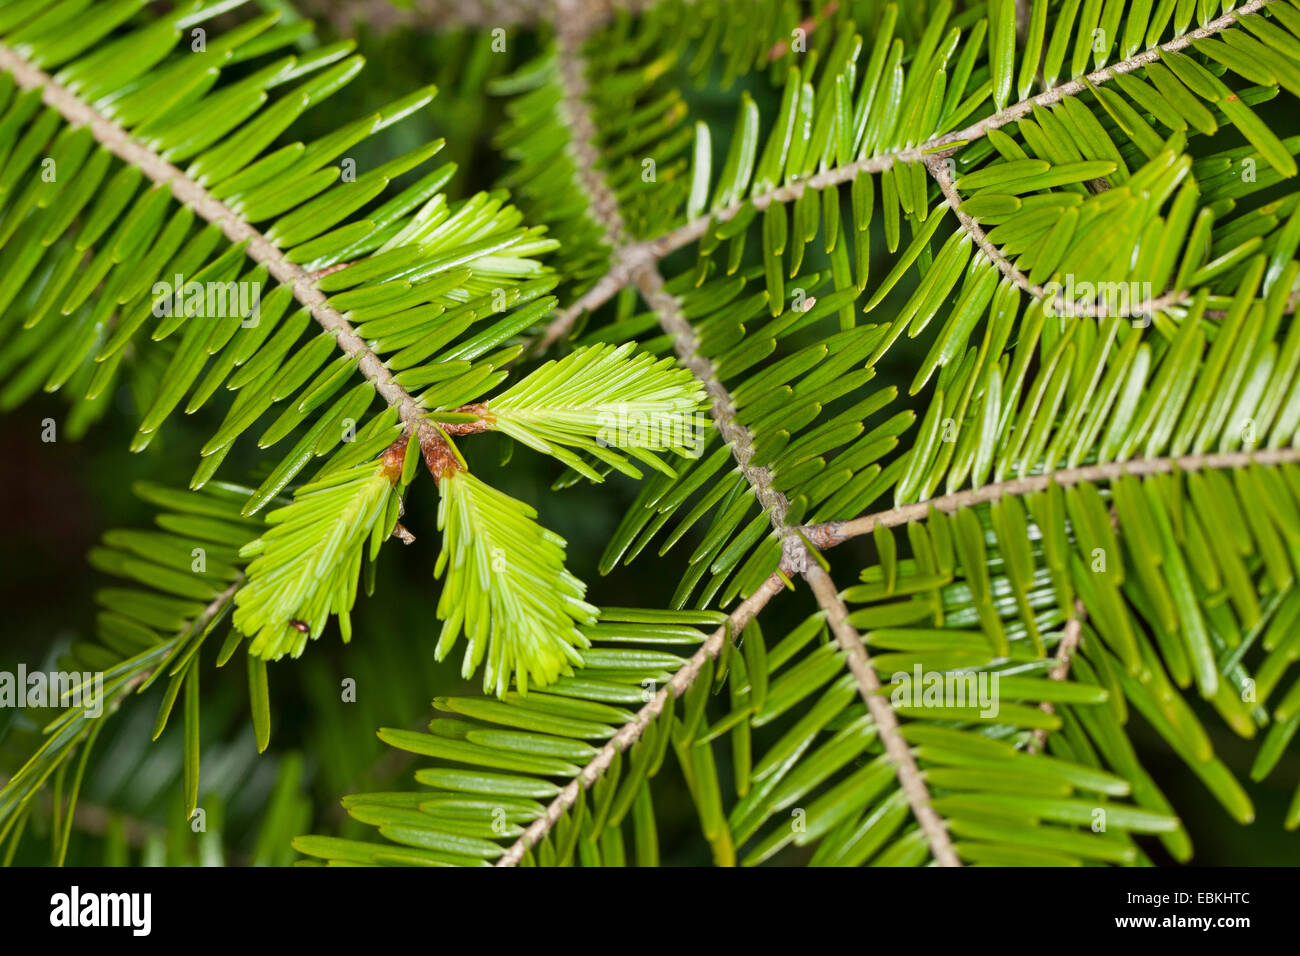 European silver fir (Abies alba), branch from above with young shoots, Germany Stock Photo